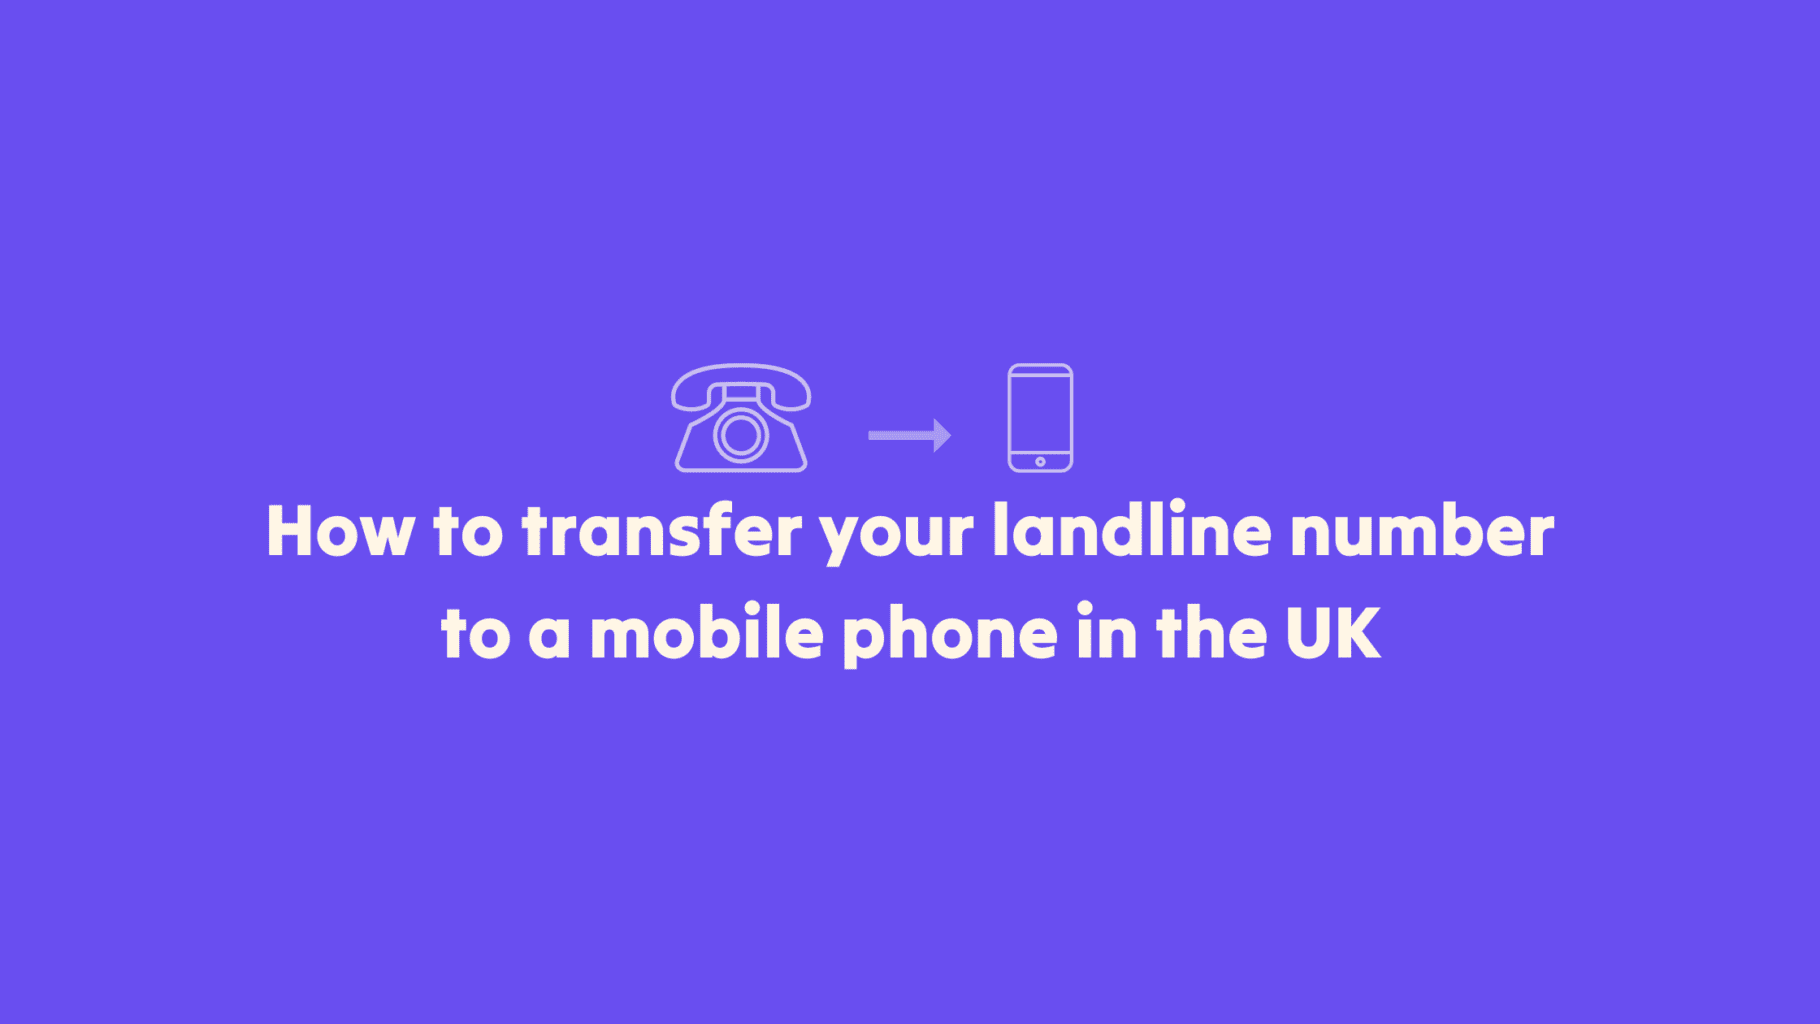 How to Transfer a Landline Number to a Mobile Phone in The UK